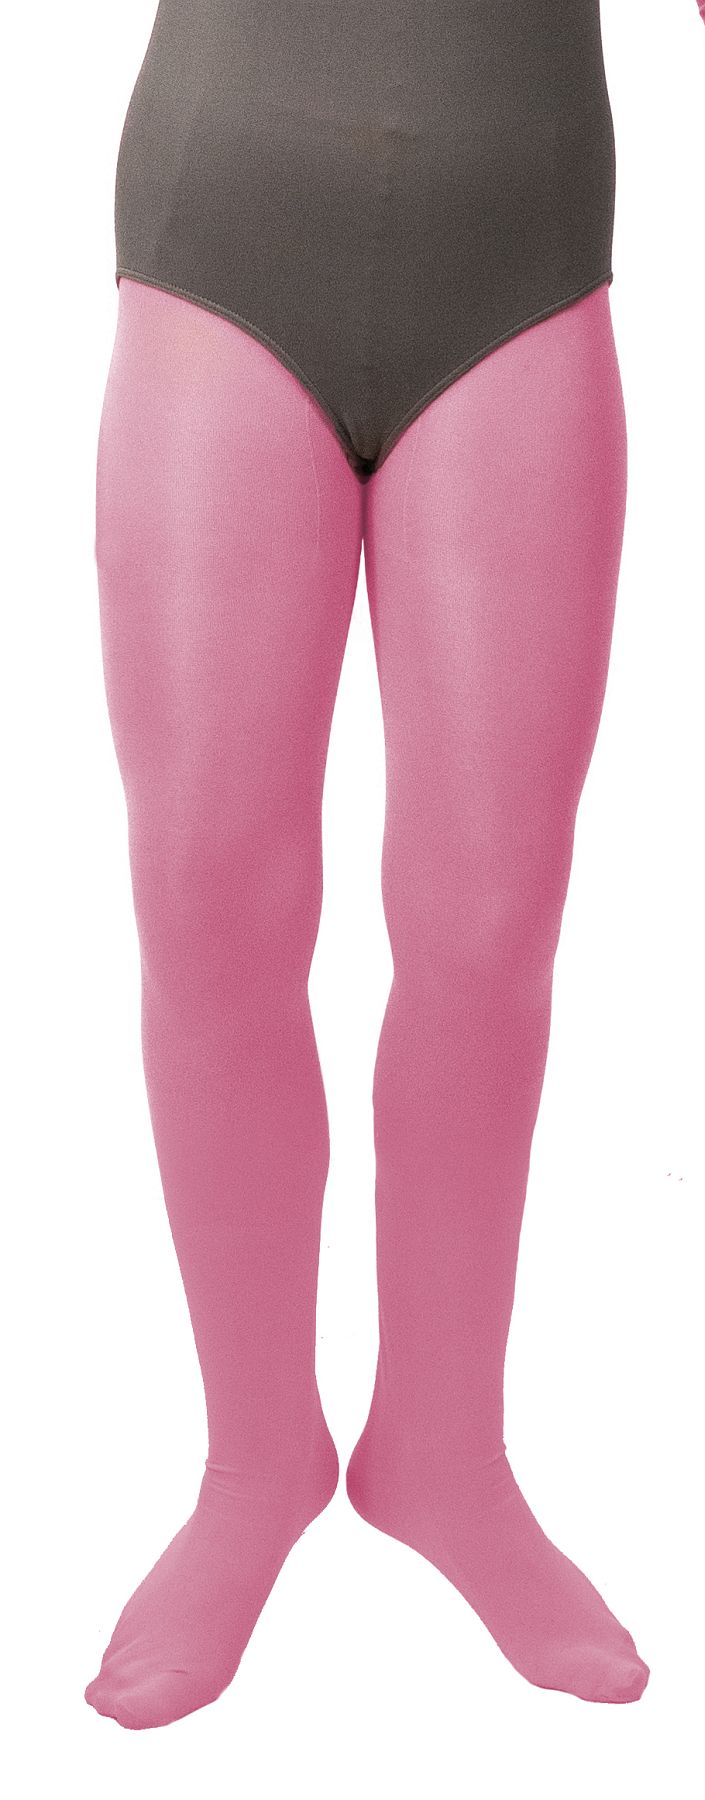 Opaque tights, pink